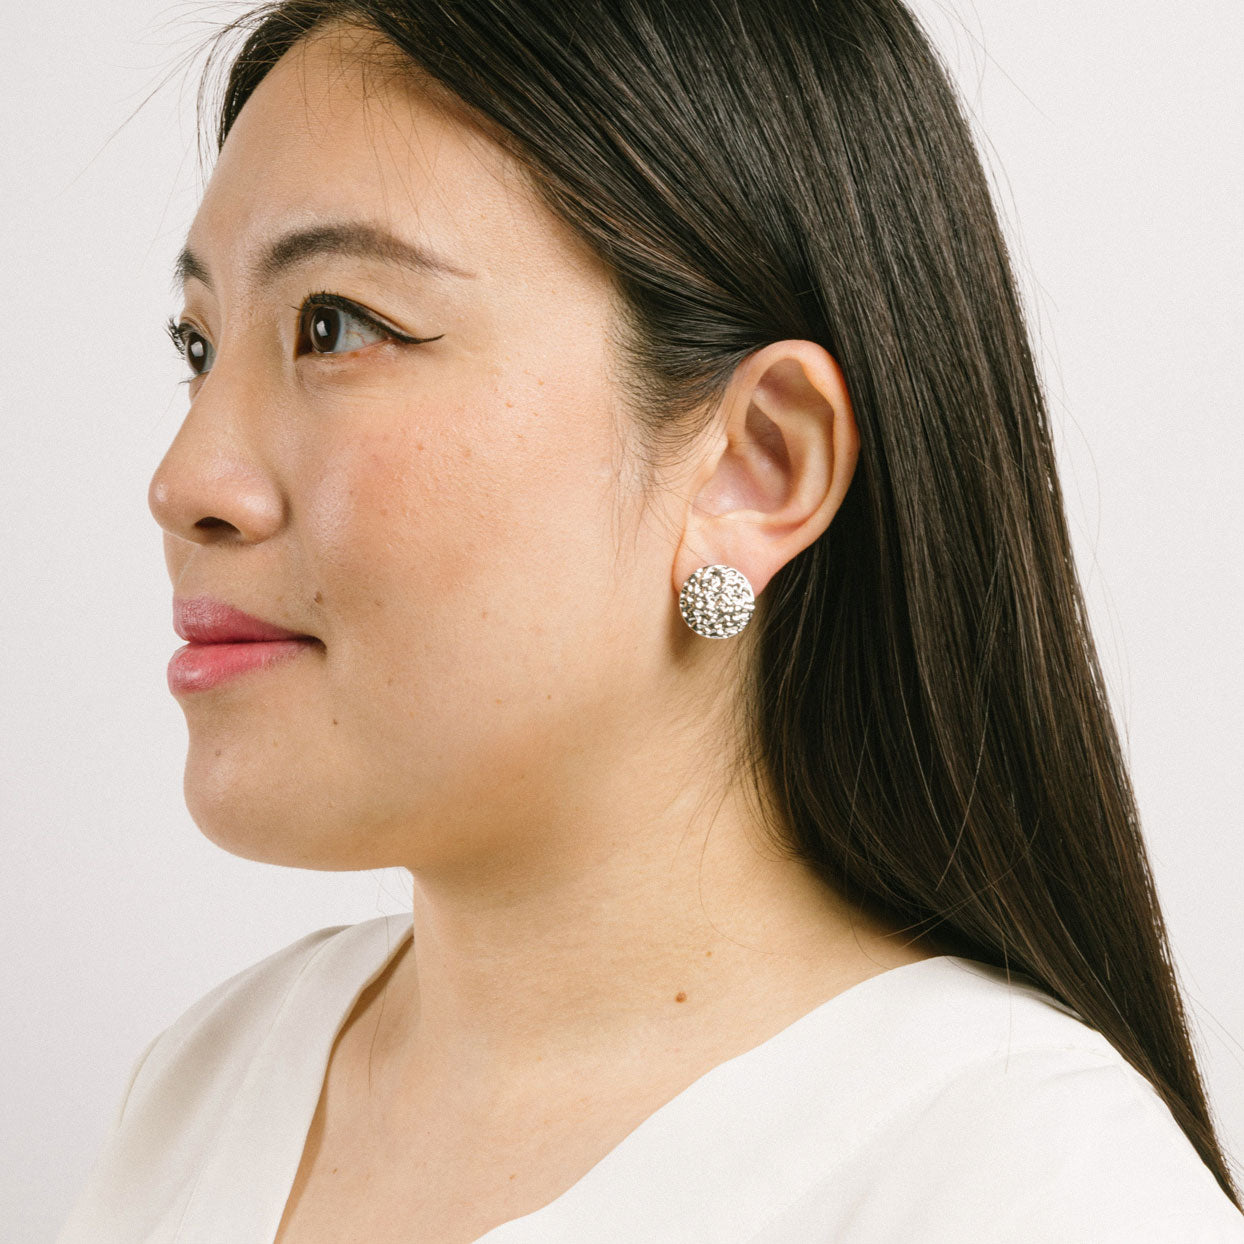 A model wearing the Paloma Clip-On Earrings in Silver provide a secure fit that is perfect for all ear types, including thick/large ears, sensitive ears, small/ thin ears, and stretched/healing ears. These earrings are crafted with a copper alloy and are free of lead and nickel. Their removable rubber padding ensures comfortable wear for up to 12 hours. This package contains one pair of earrings.